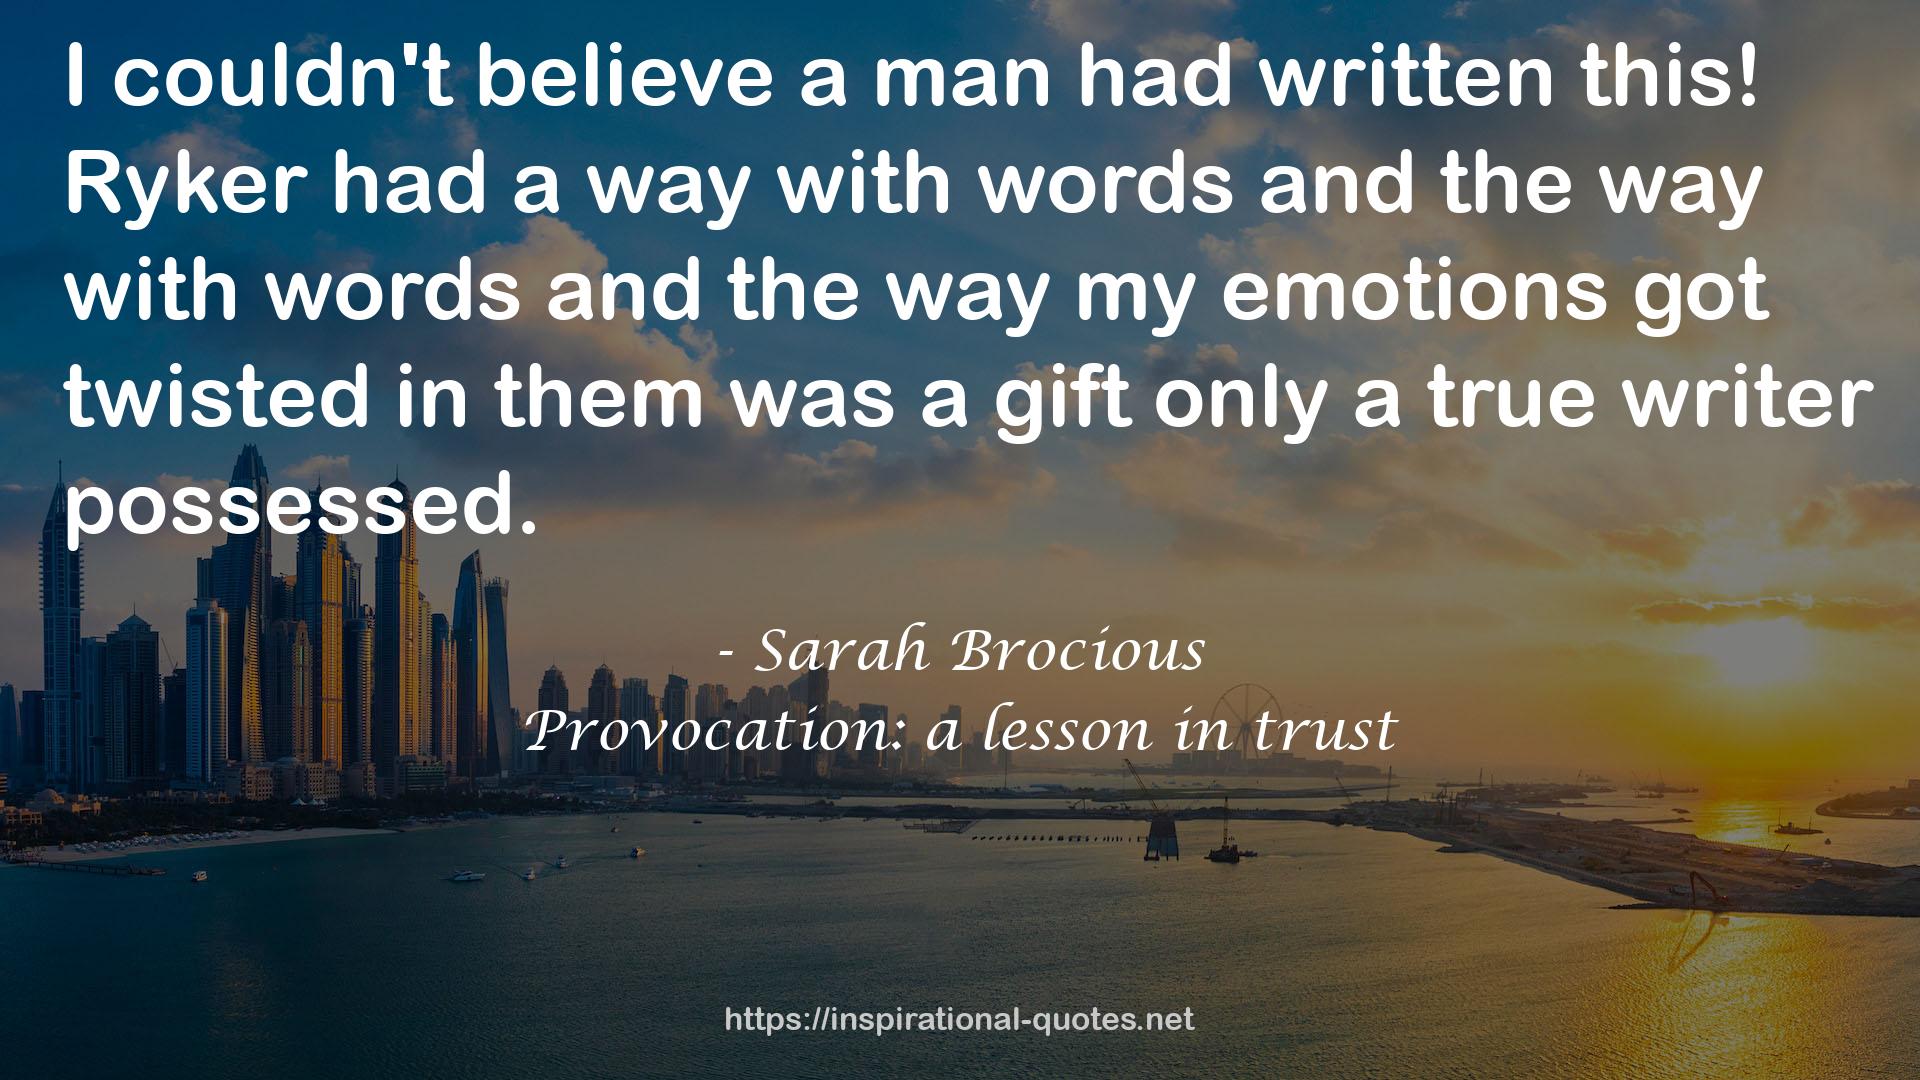 Provocation: a lesson in trust QUOTES